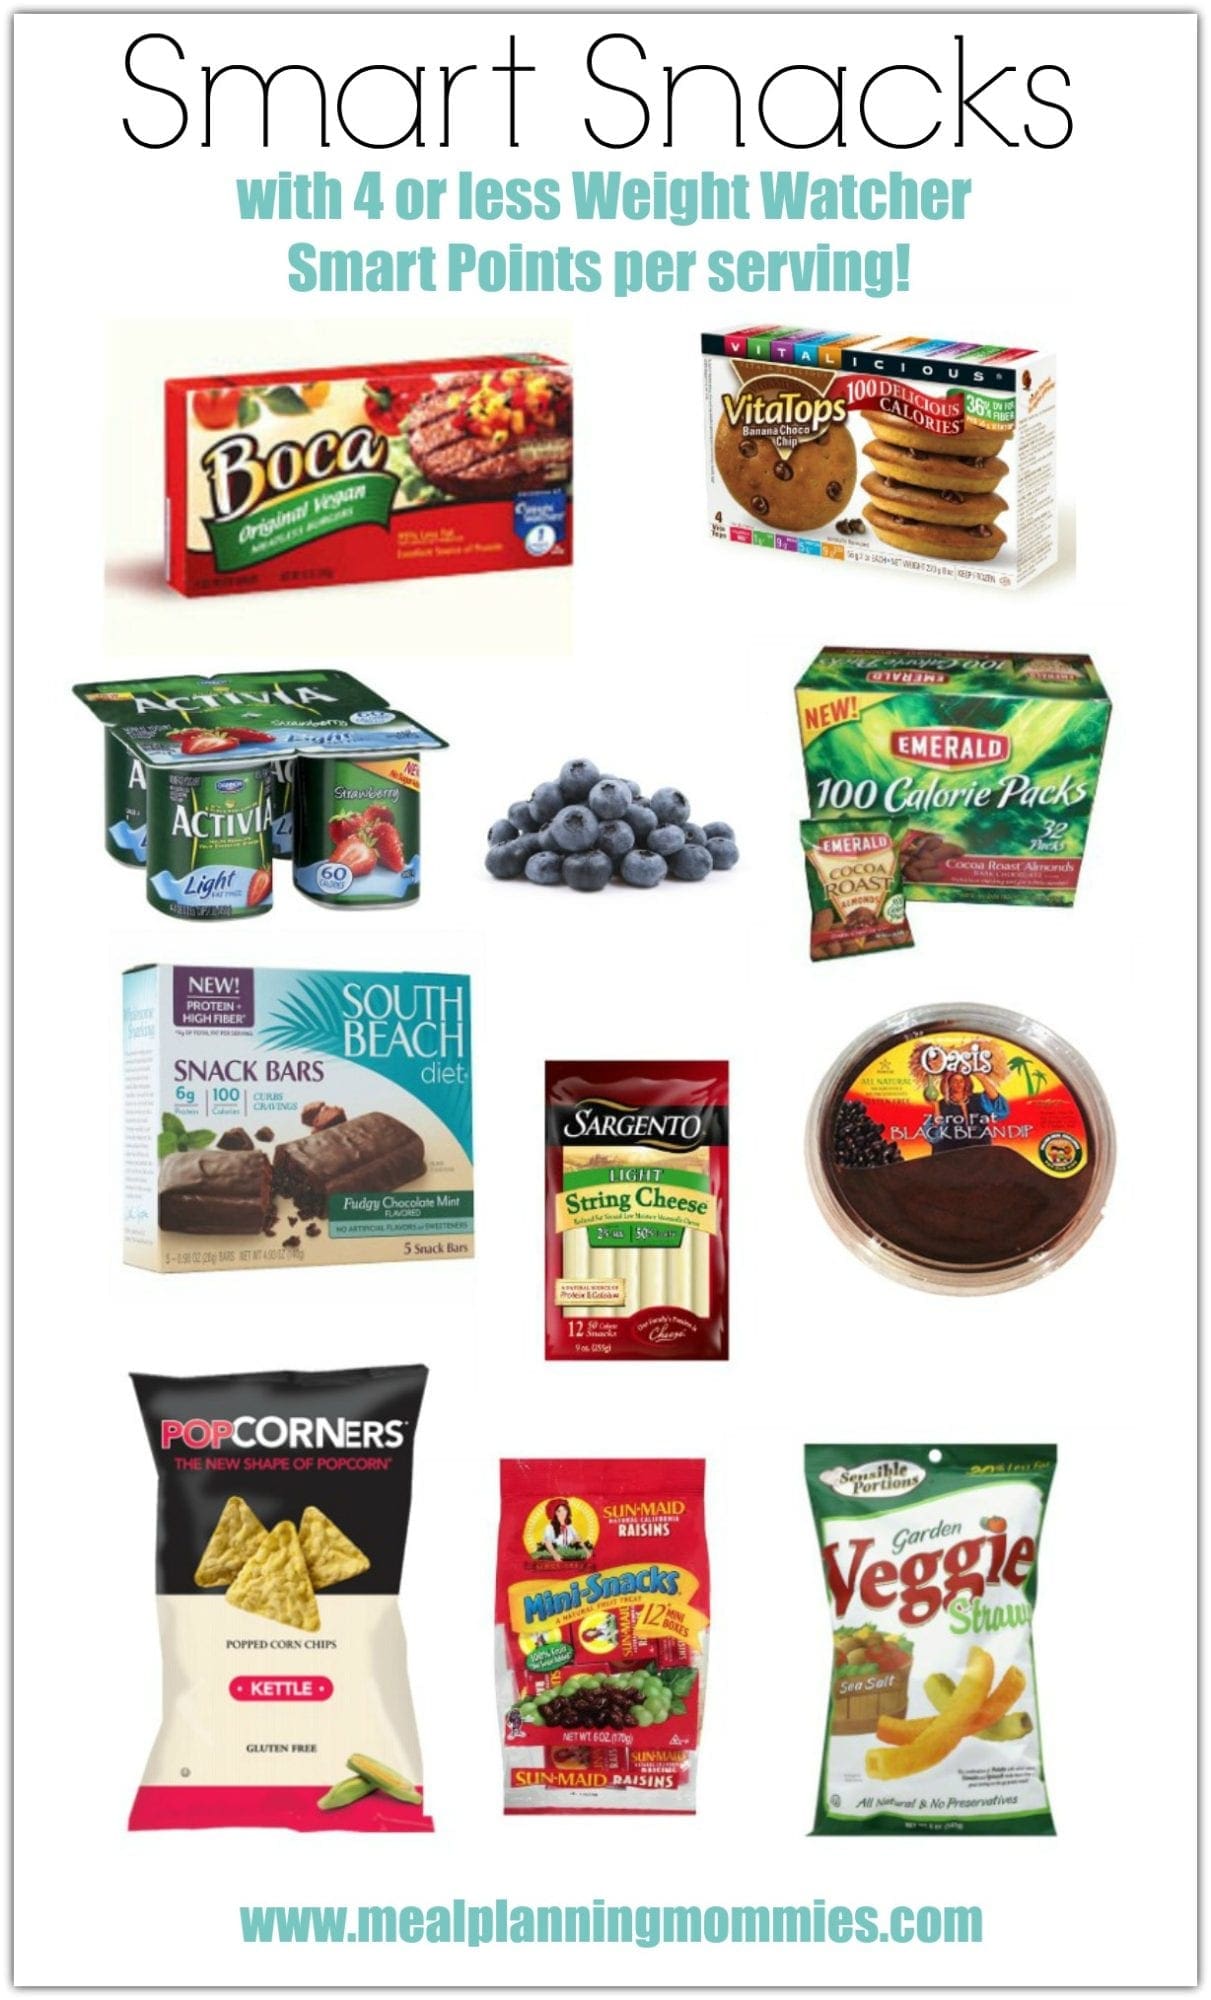 Smart Snacks with 4 or less Weight Watcher Smart Points of less per serving- Meal Planning Mommies